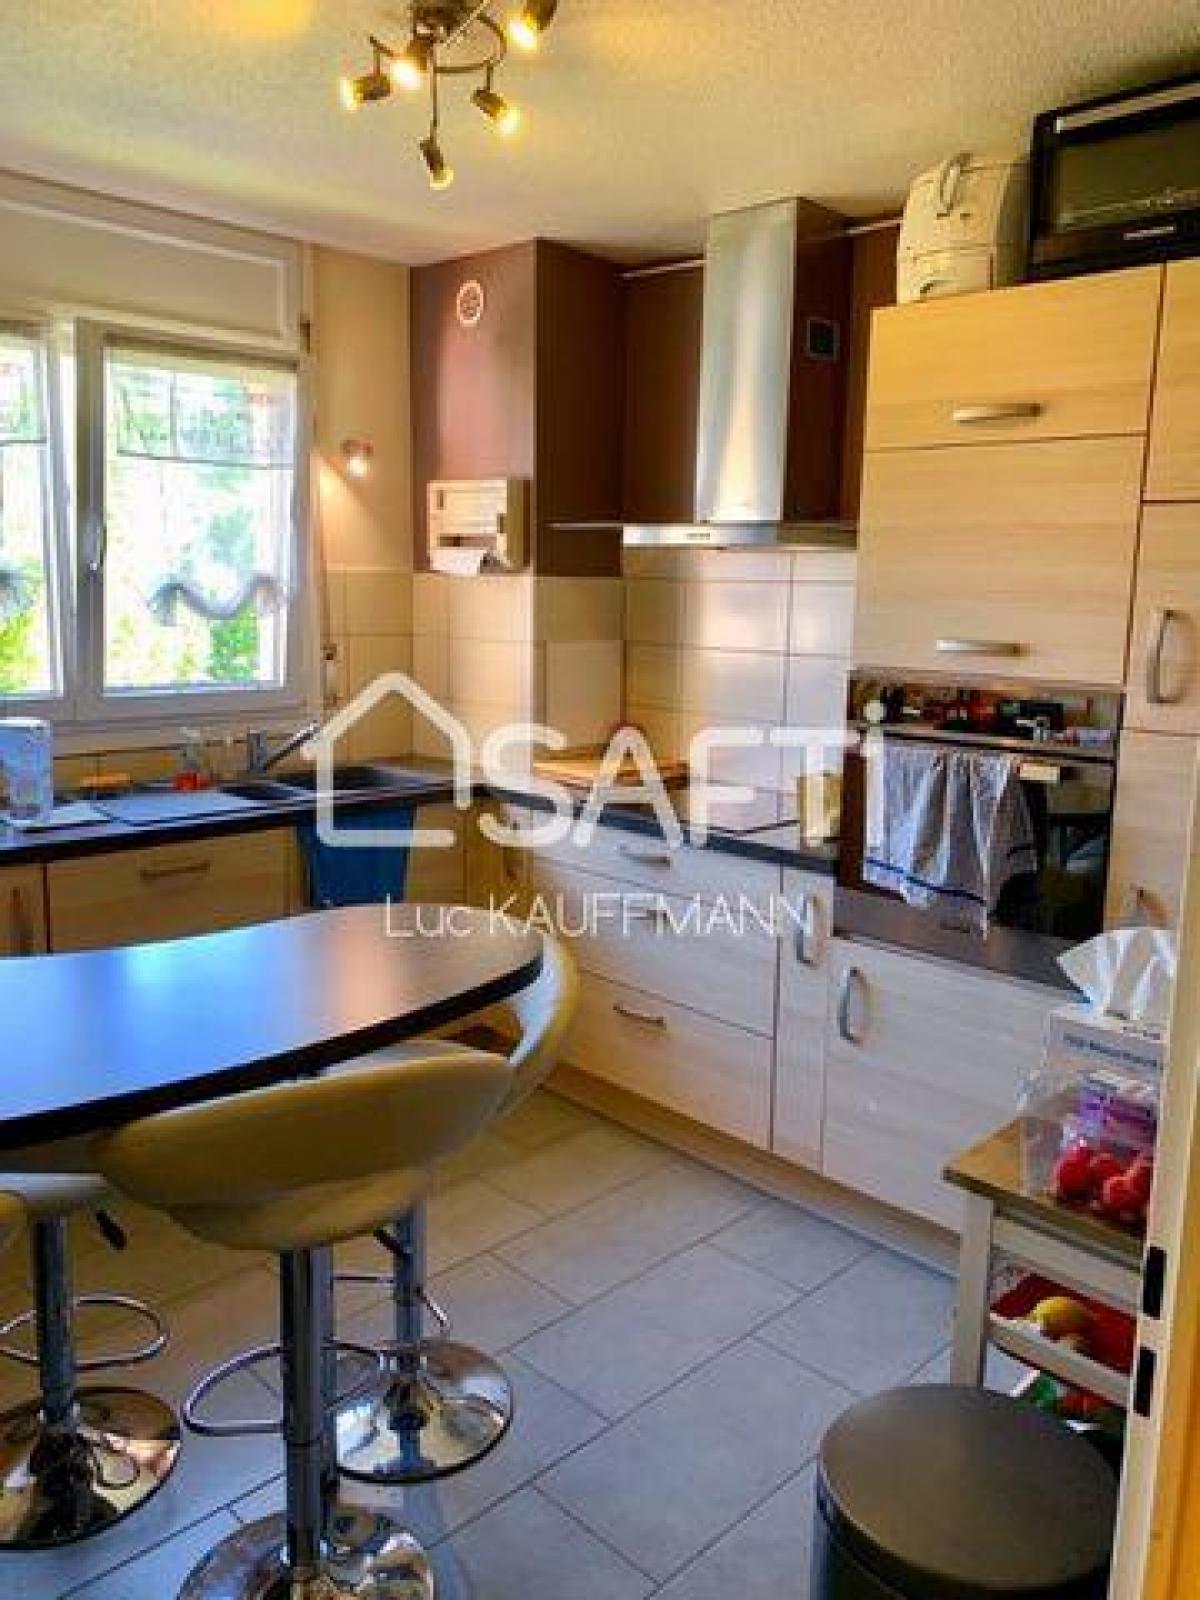 Picture of Apartment For Sale in Illkirch-Graffenstaden, Alsace, France